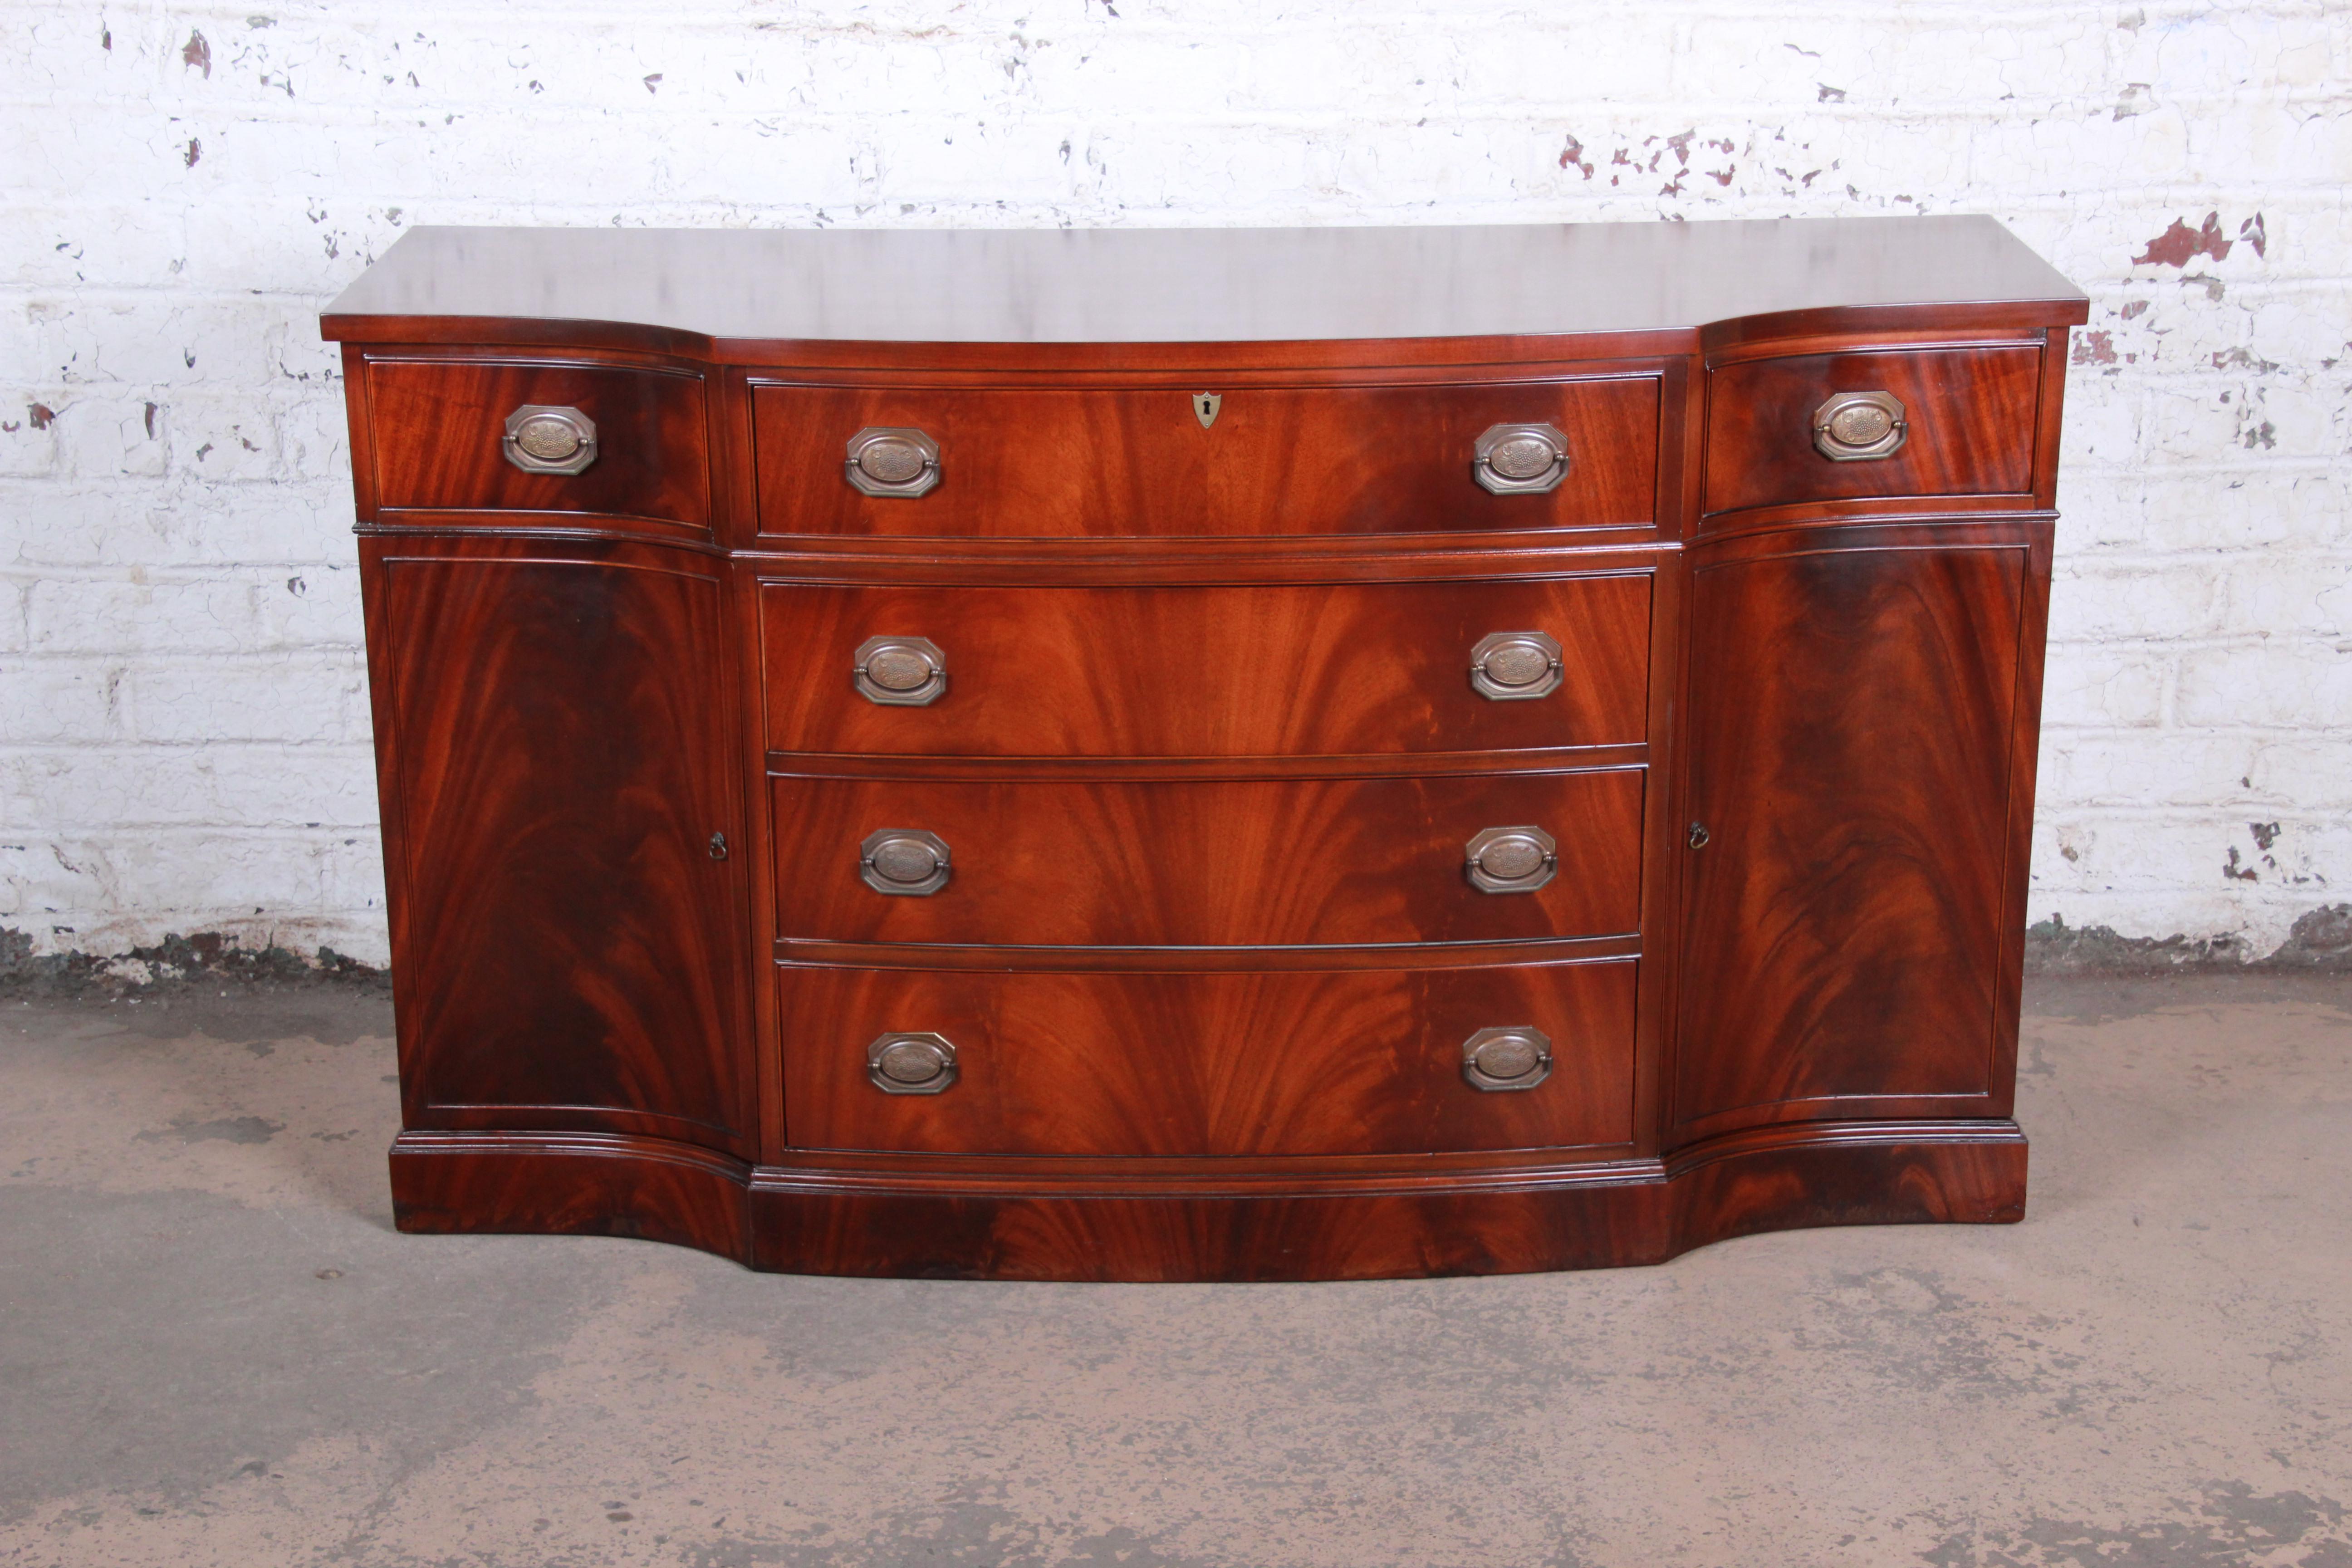 A gorgeous mahogany bow front sideboard or buffet server, circa 1940s. The sideboard features stunning flame mahogany wood grain with a bow Front Design and original brass hardware. It offers ample storage, with six dovetailed drawers and shelved